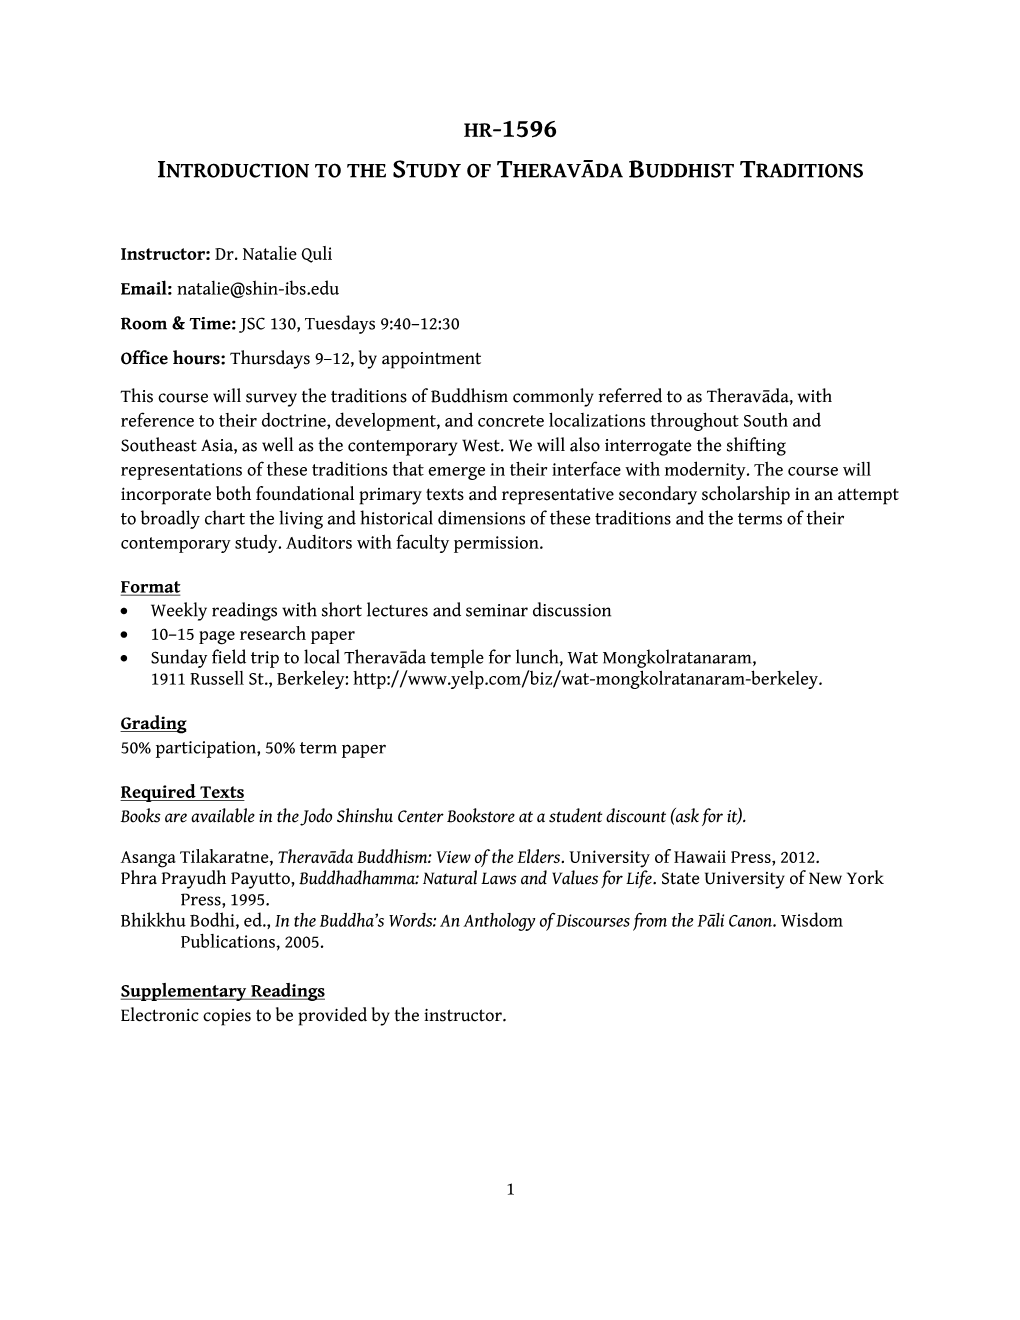 Hr-1596 Introduction to the Study of Theravāda Buddhist Traditions